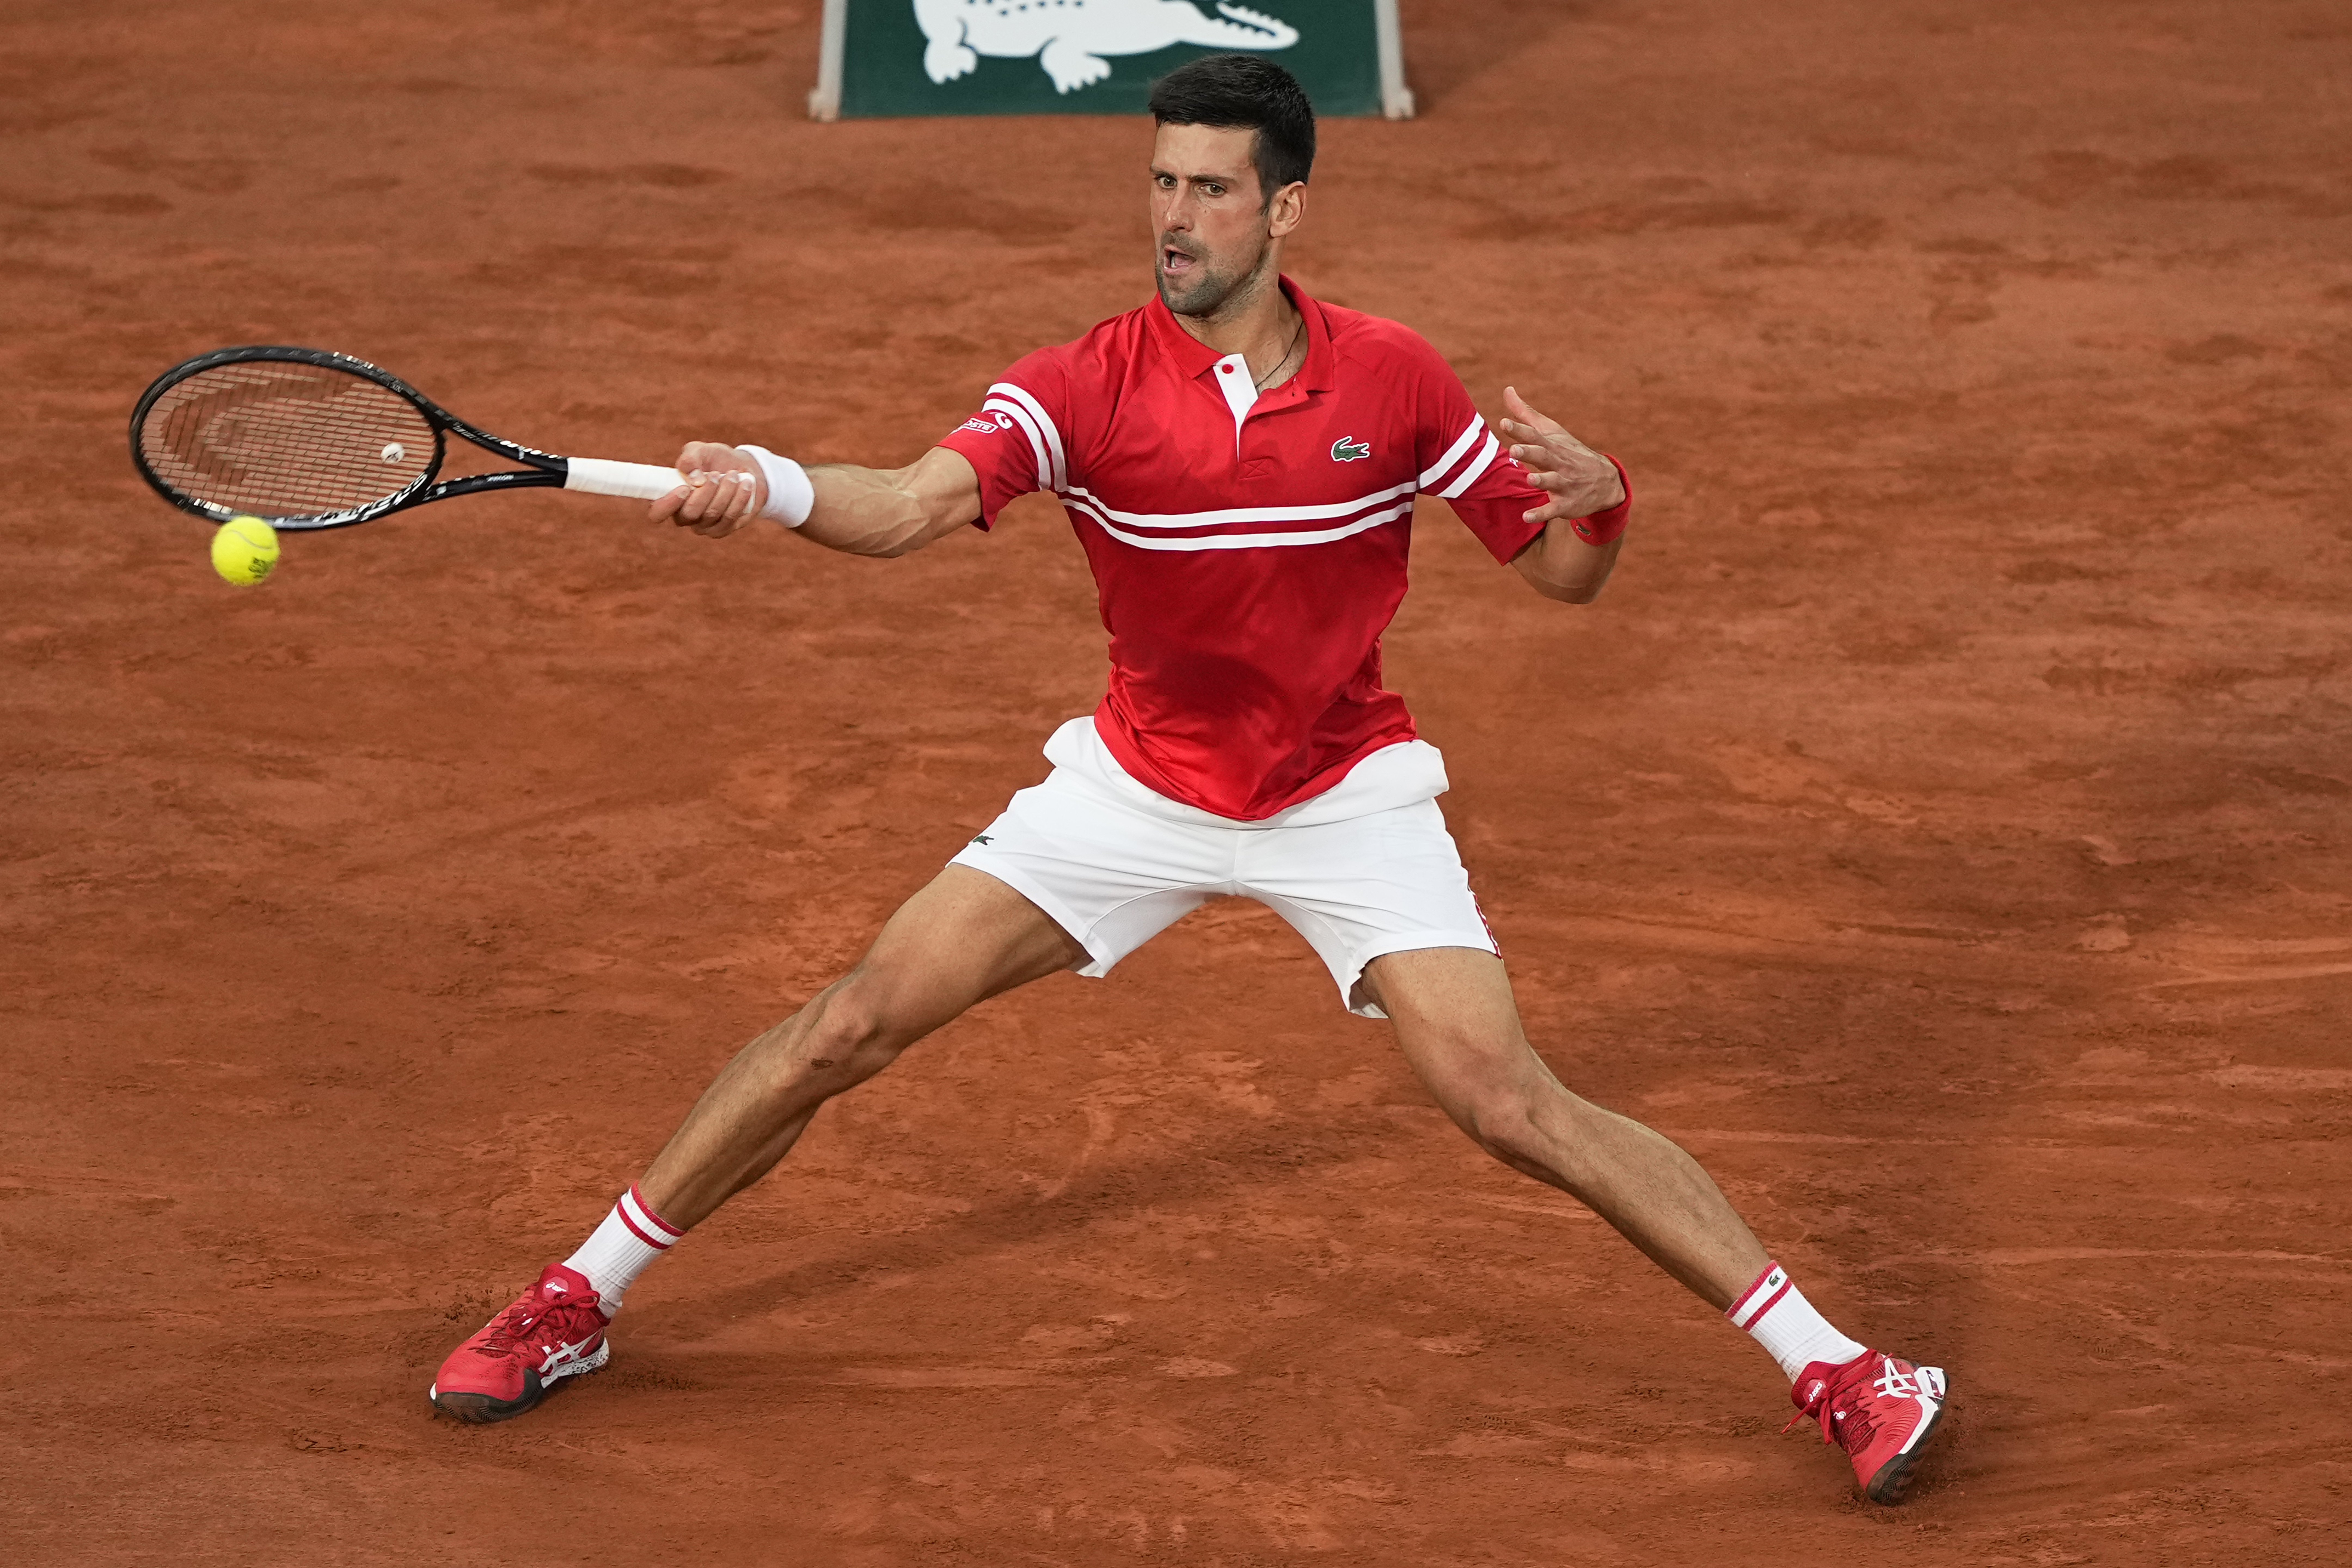 French Open 2021 Mens Semifinals TV schedule, time, free live streams, how to watch Novak Djokovic vs